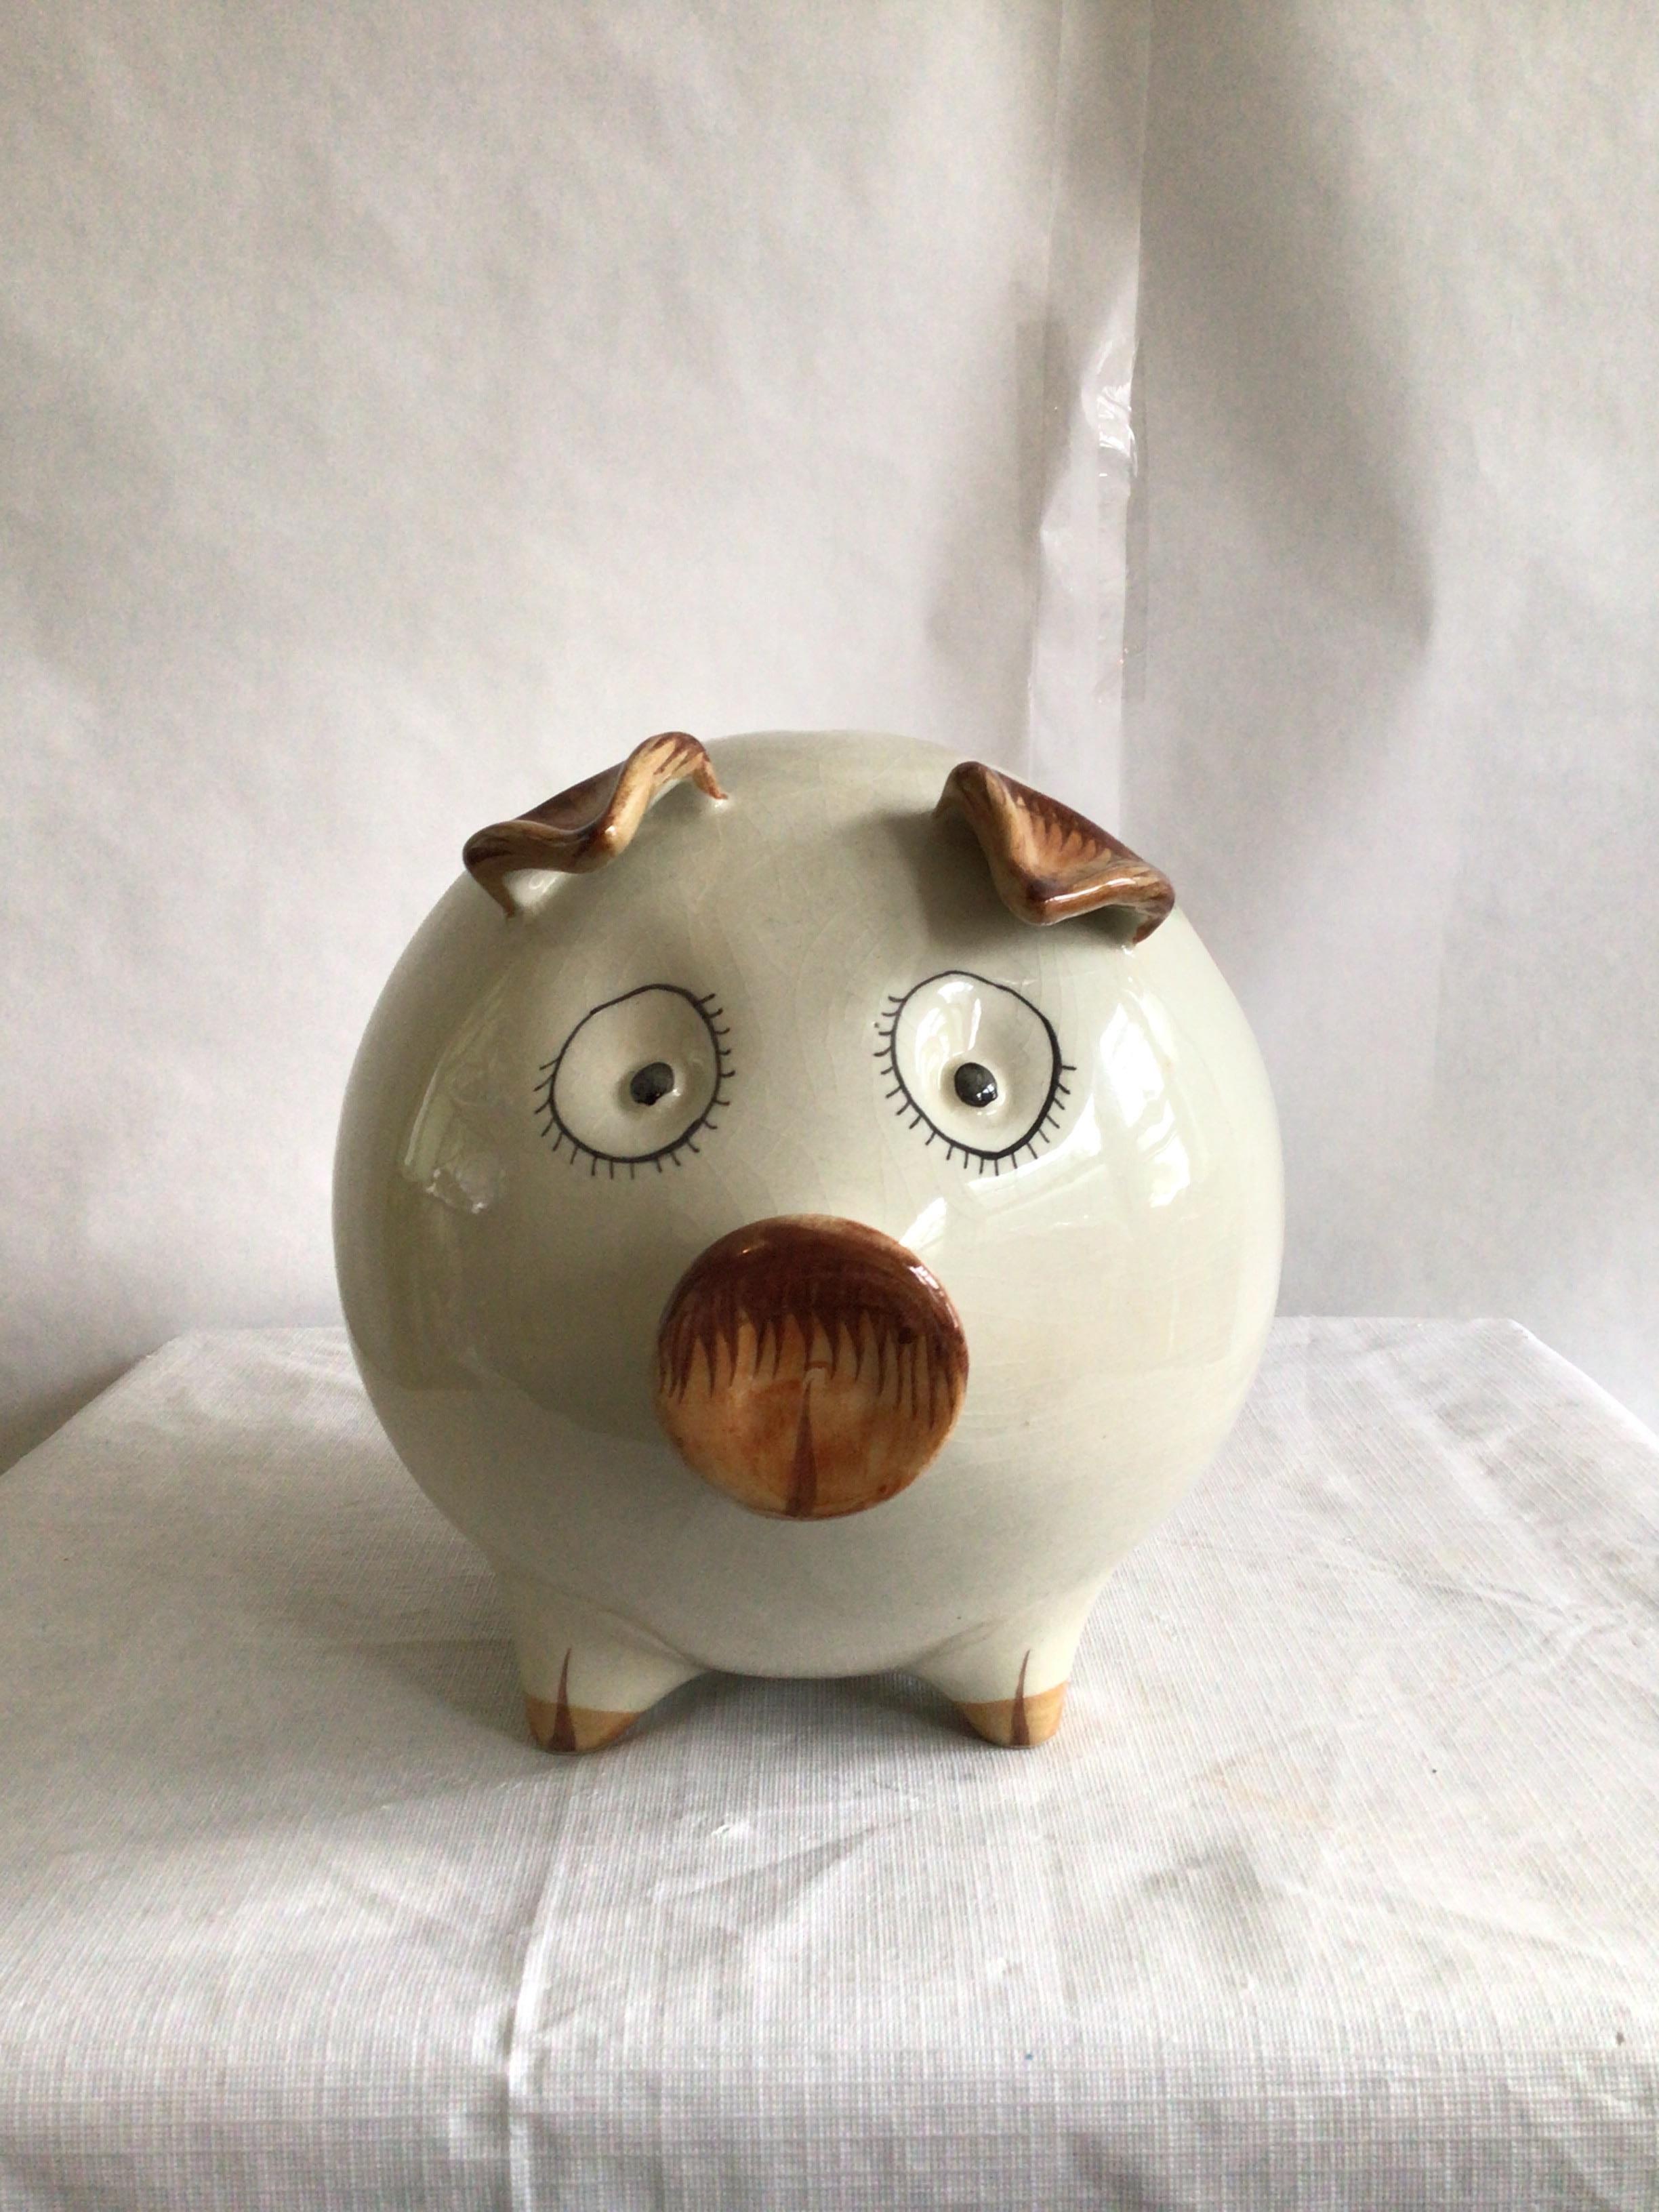 1960s Portugese Glazed Ceramic Painted Piggy Bank
Stopper at bottom included
Stamped: Made in Portugal
Pink and Yellow hand-painted floral motif